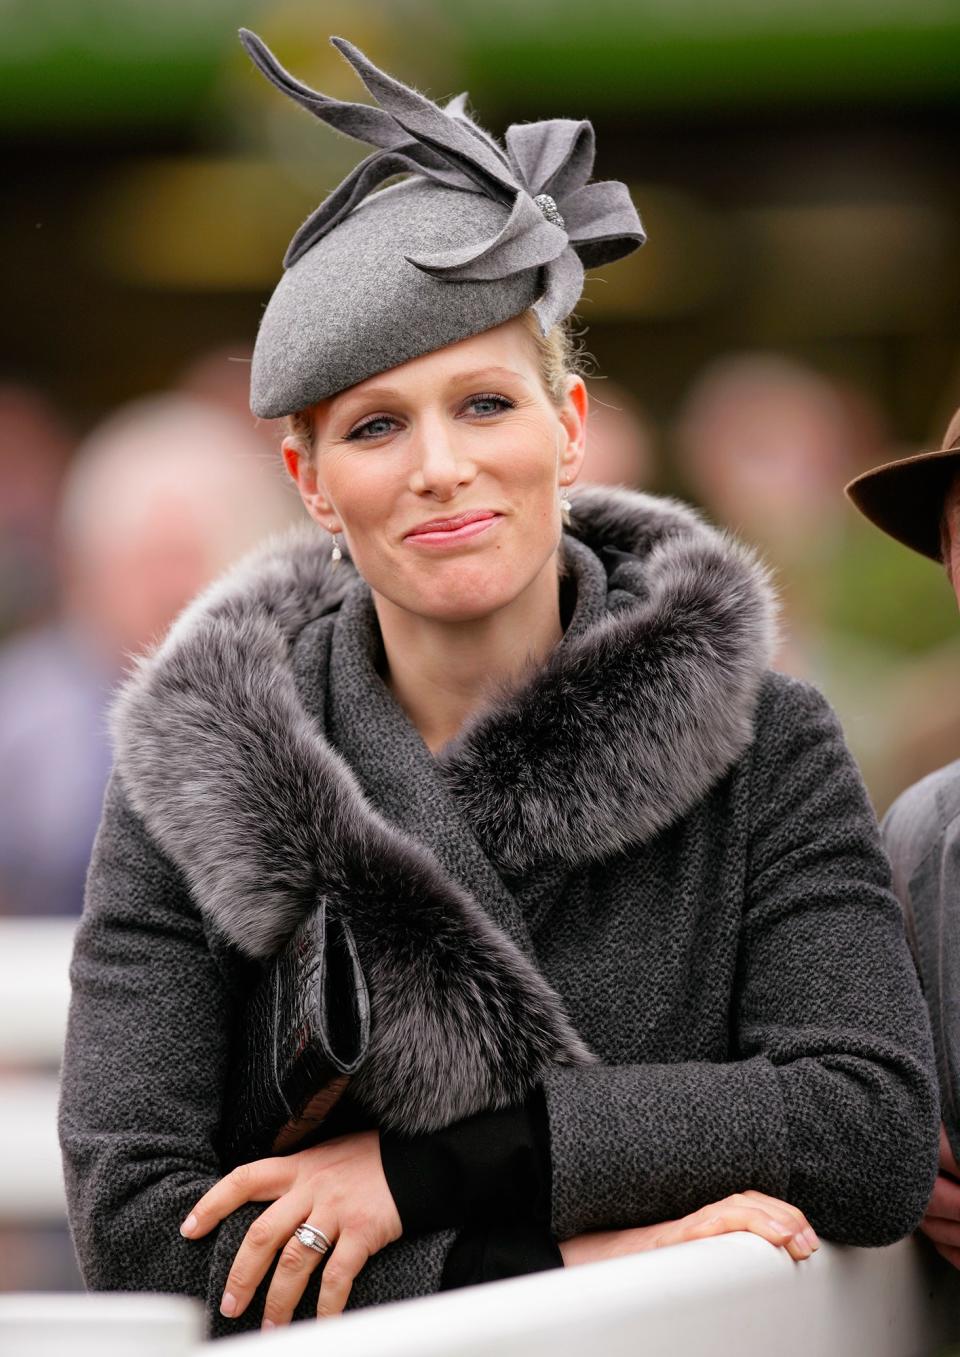 Equestrian Zara Tindall received a custom-designed diamond and platinum ring with a divided diamond band from former rugby player Mike Tindall.